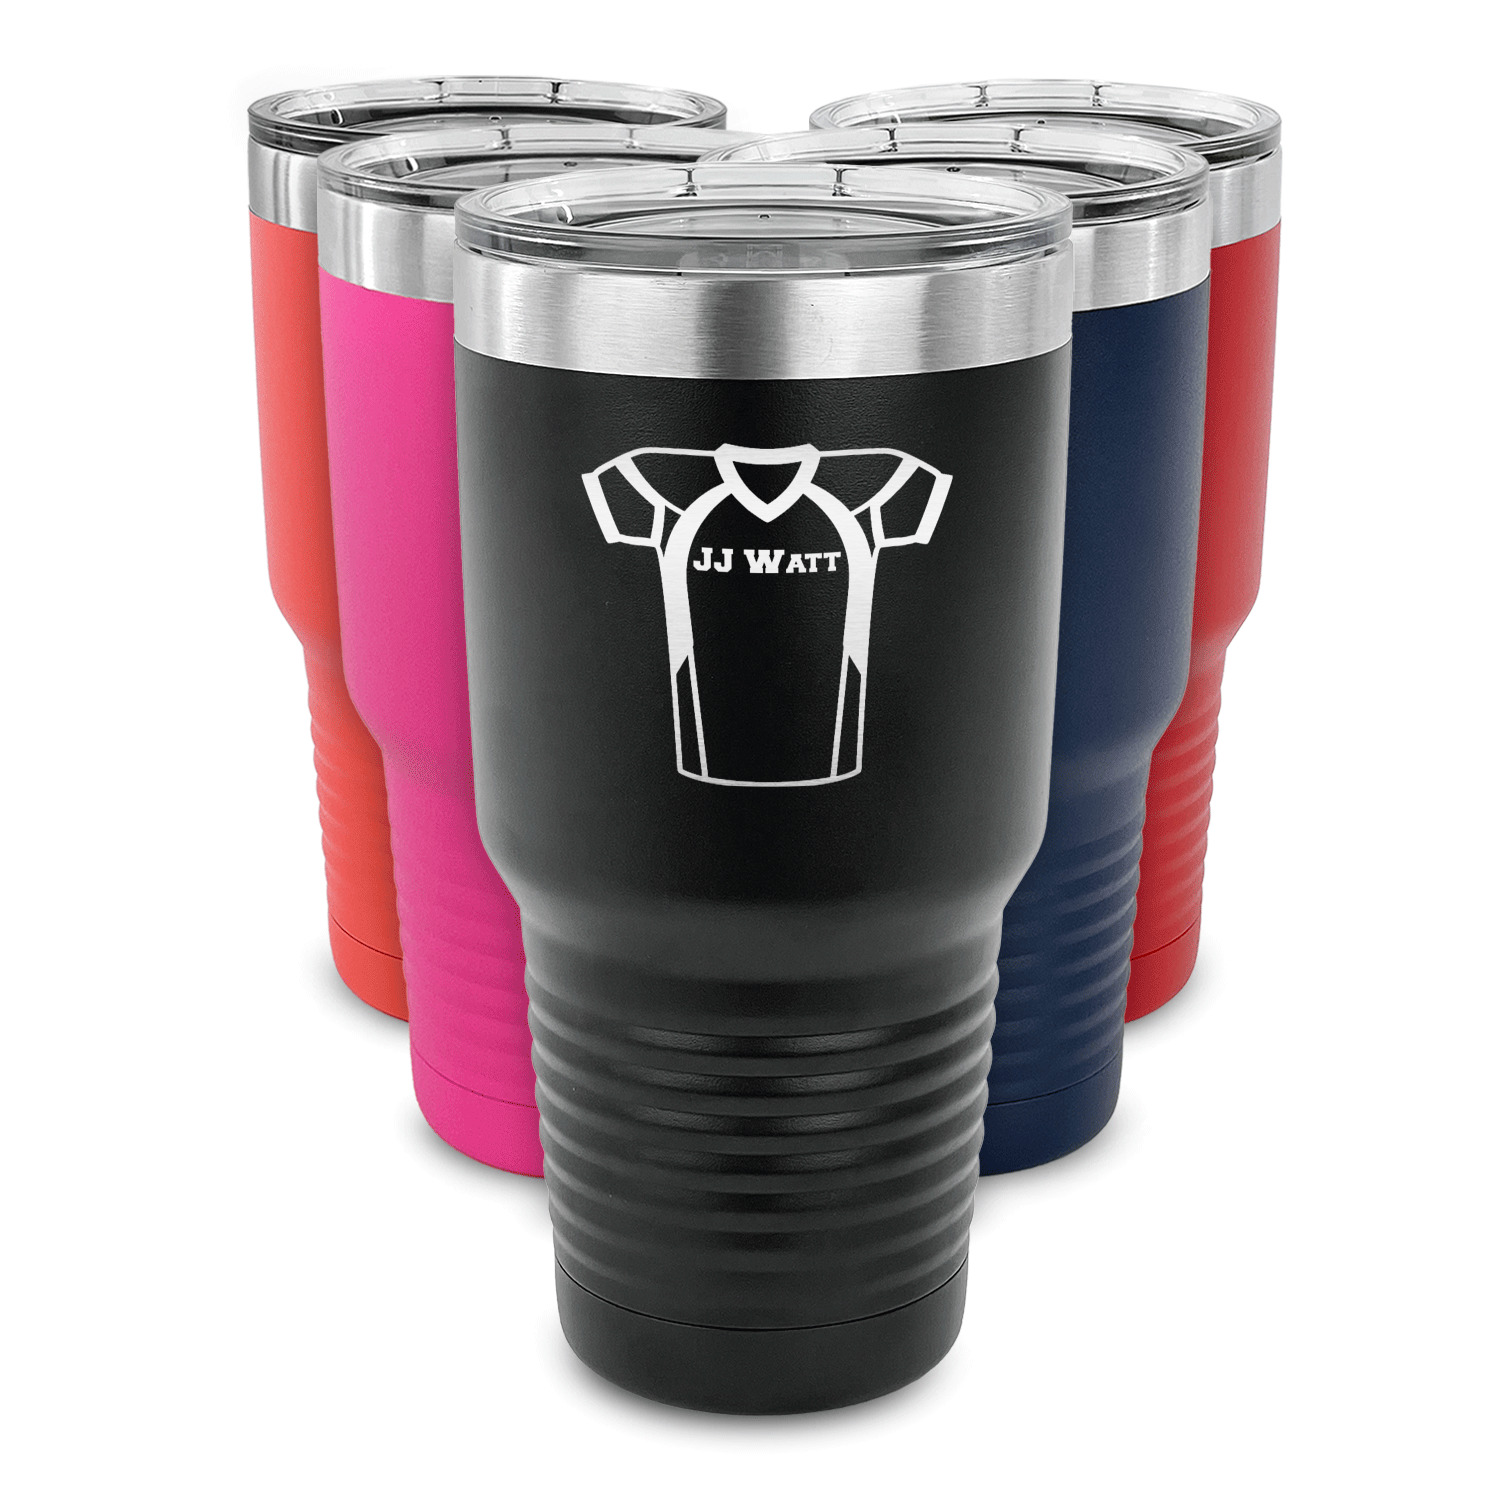 https://www.youcustomizeit.com/common/MAKE/475292/Football-Jersey-30-oz-Stainless-Steel-Ringneck-Tumblers-Parent-Main.jpg?lm=1633712317